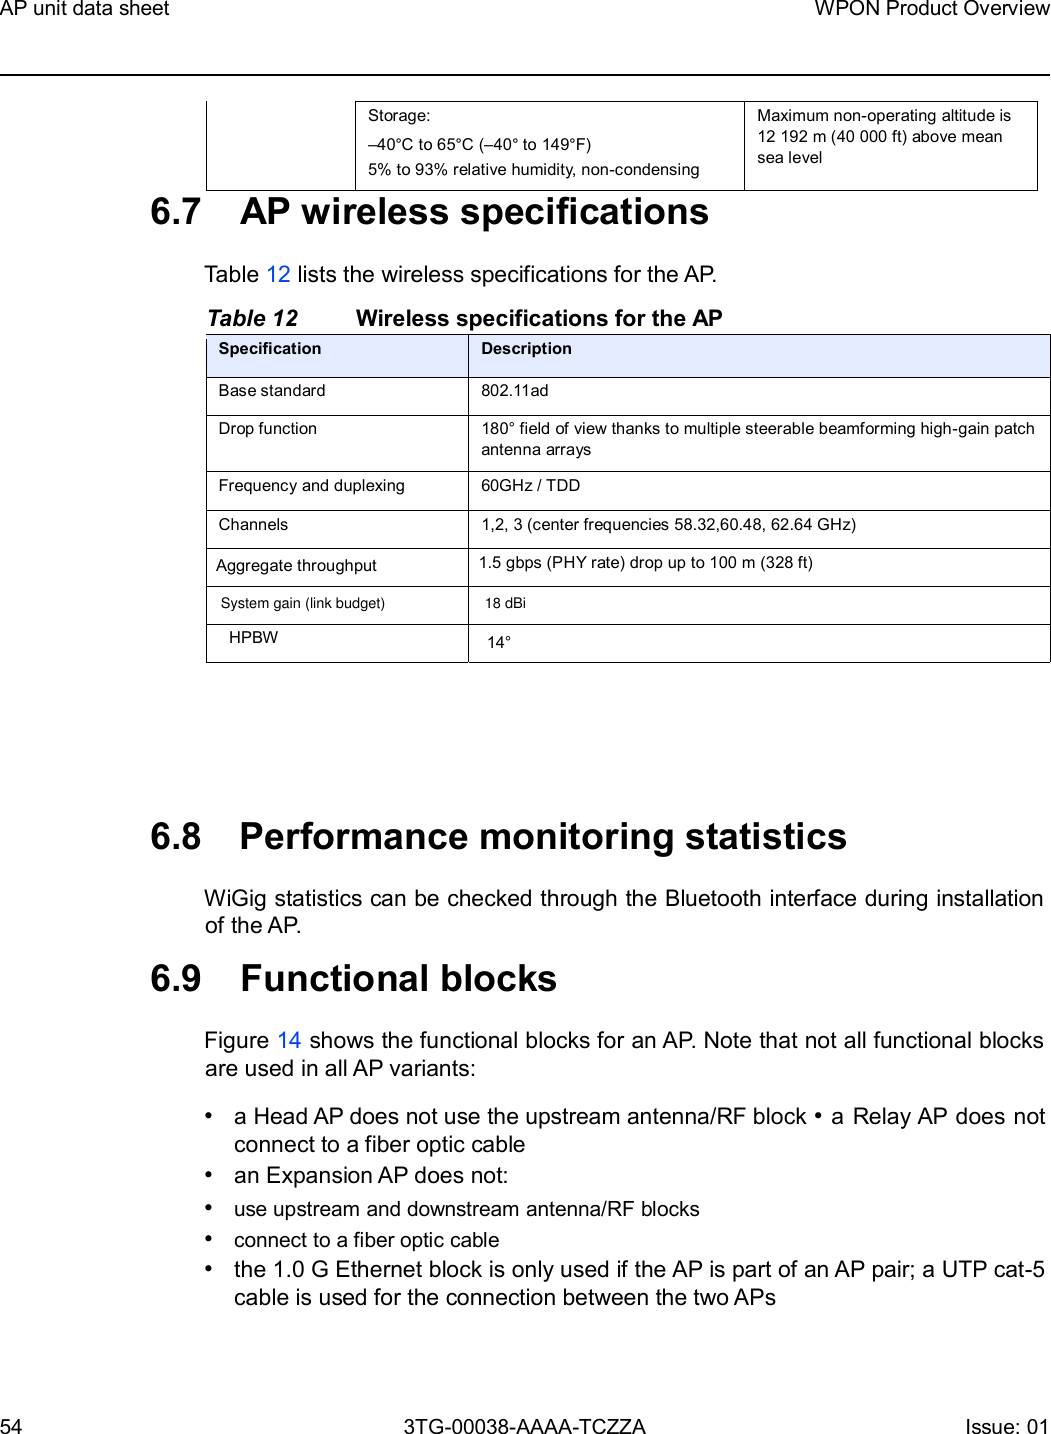 Page 54 of Nokia Bell 7577WPONAPED WPON User Manual WPON Product Overview